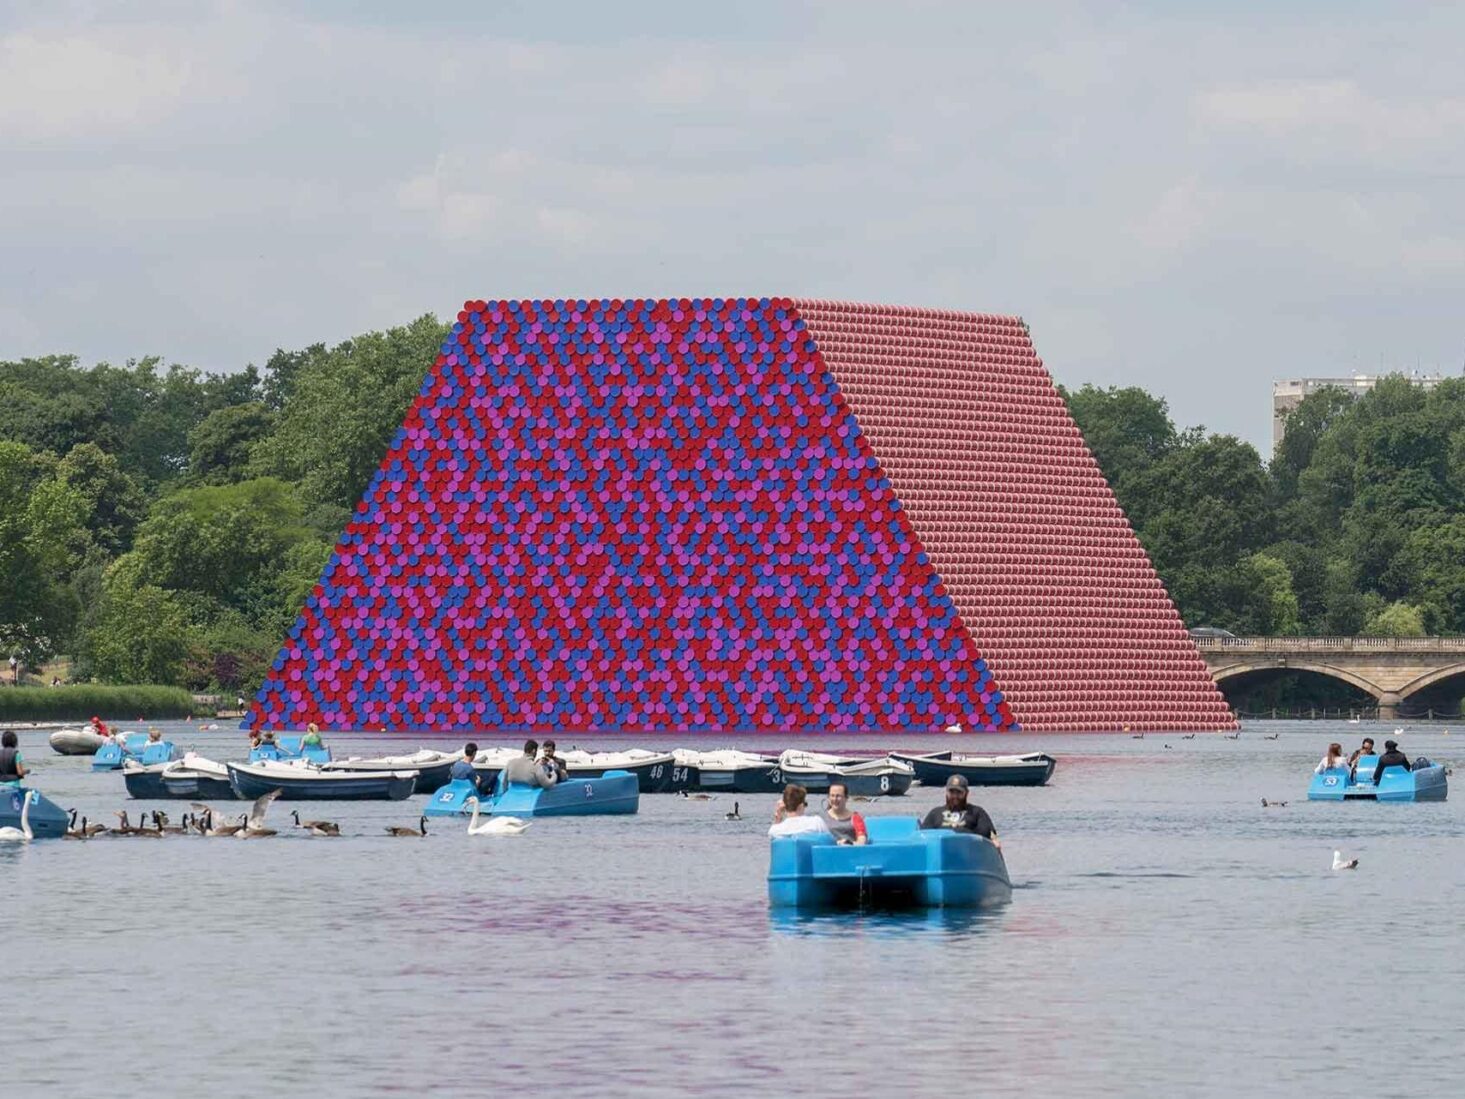 The Bulgarian installation artist brings his unique brand of big art to London’s Serpentine